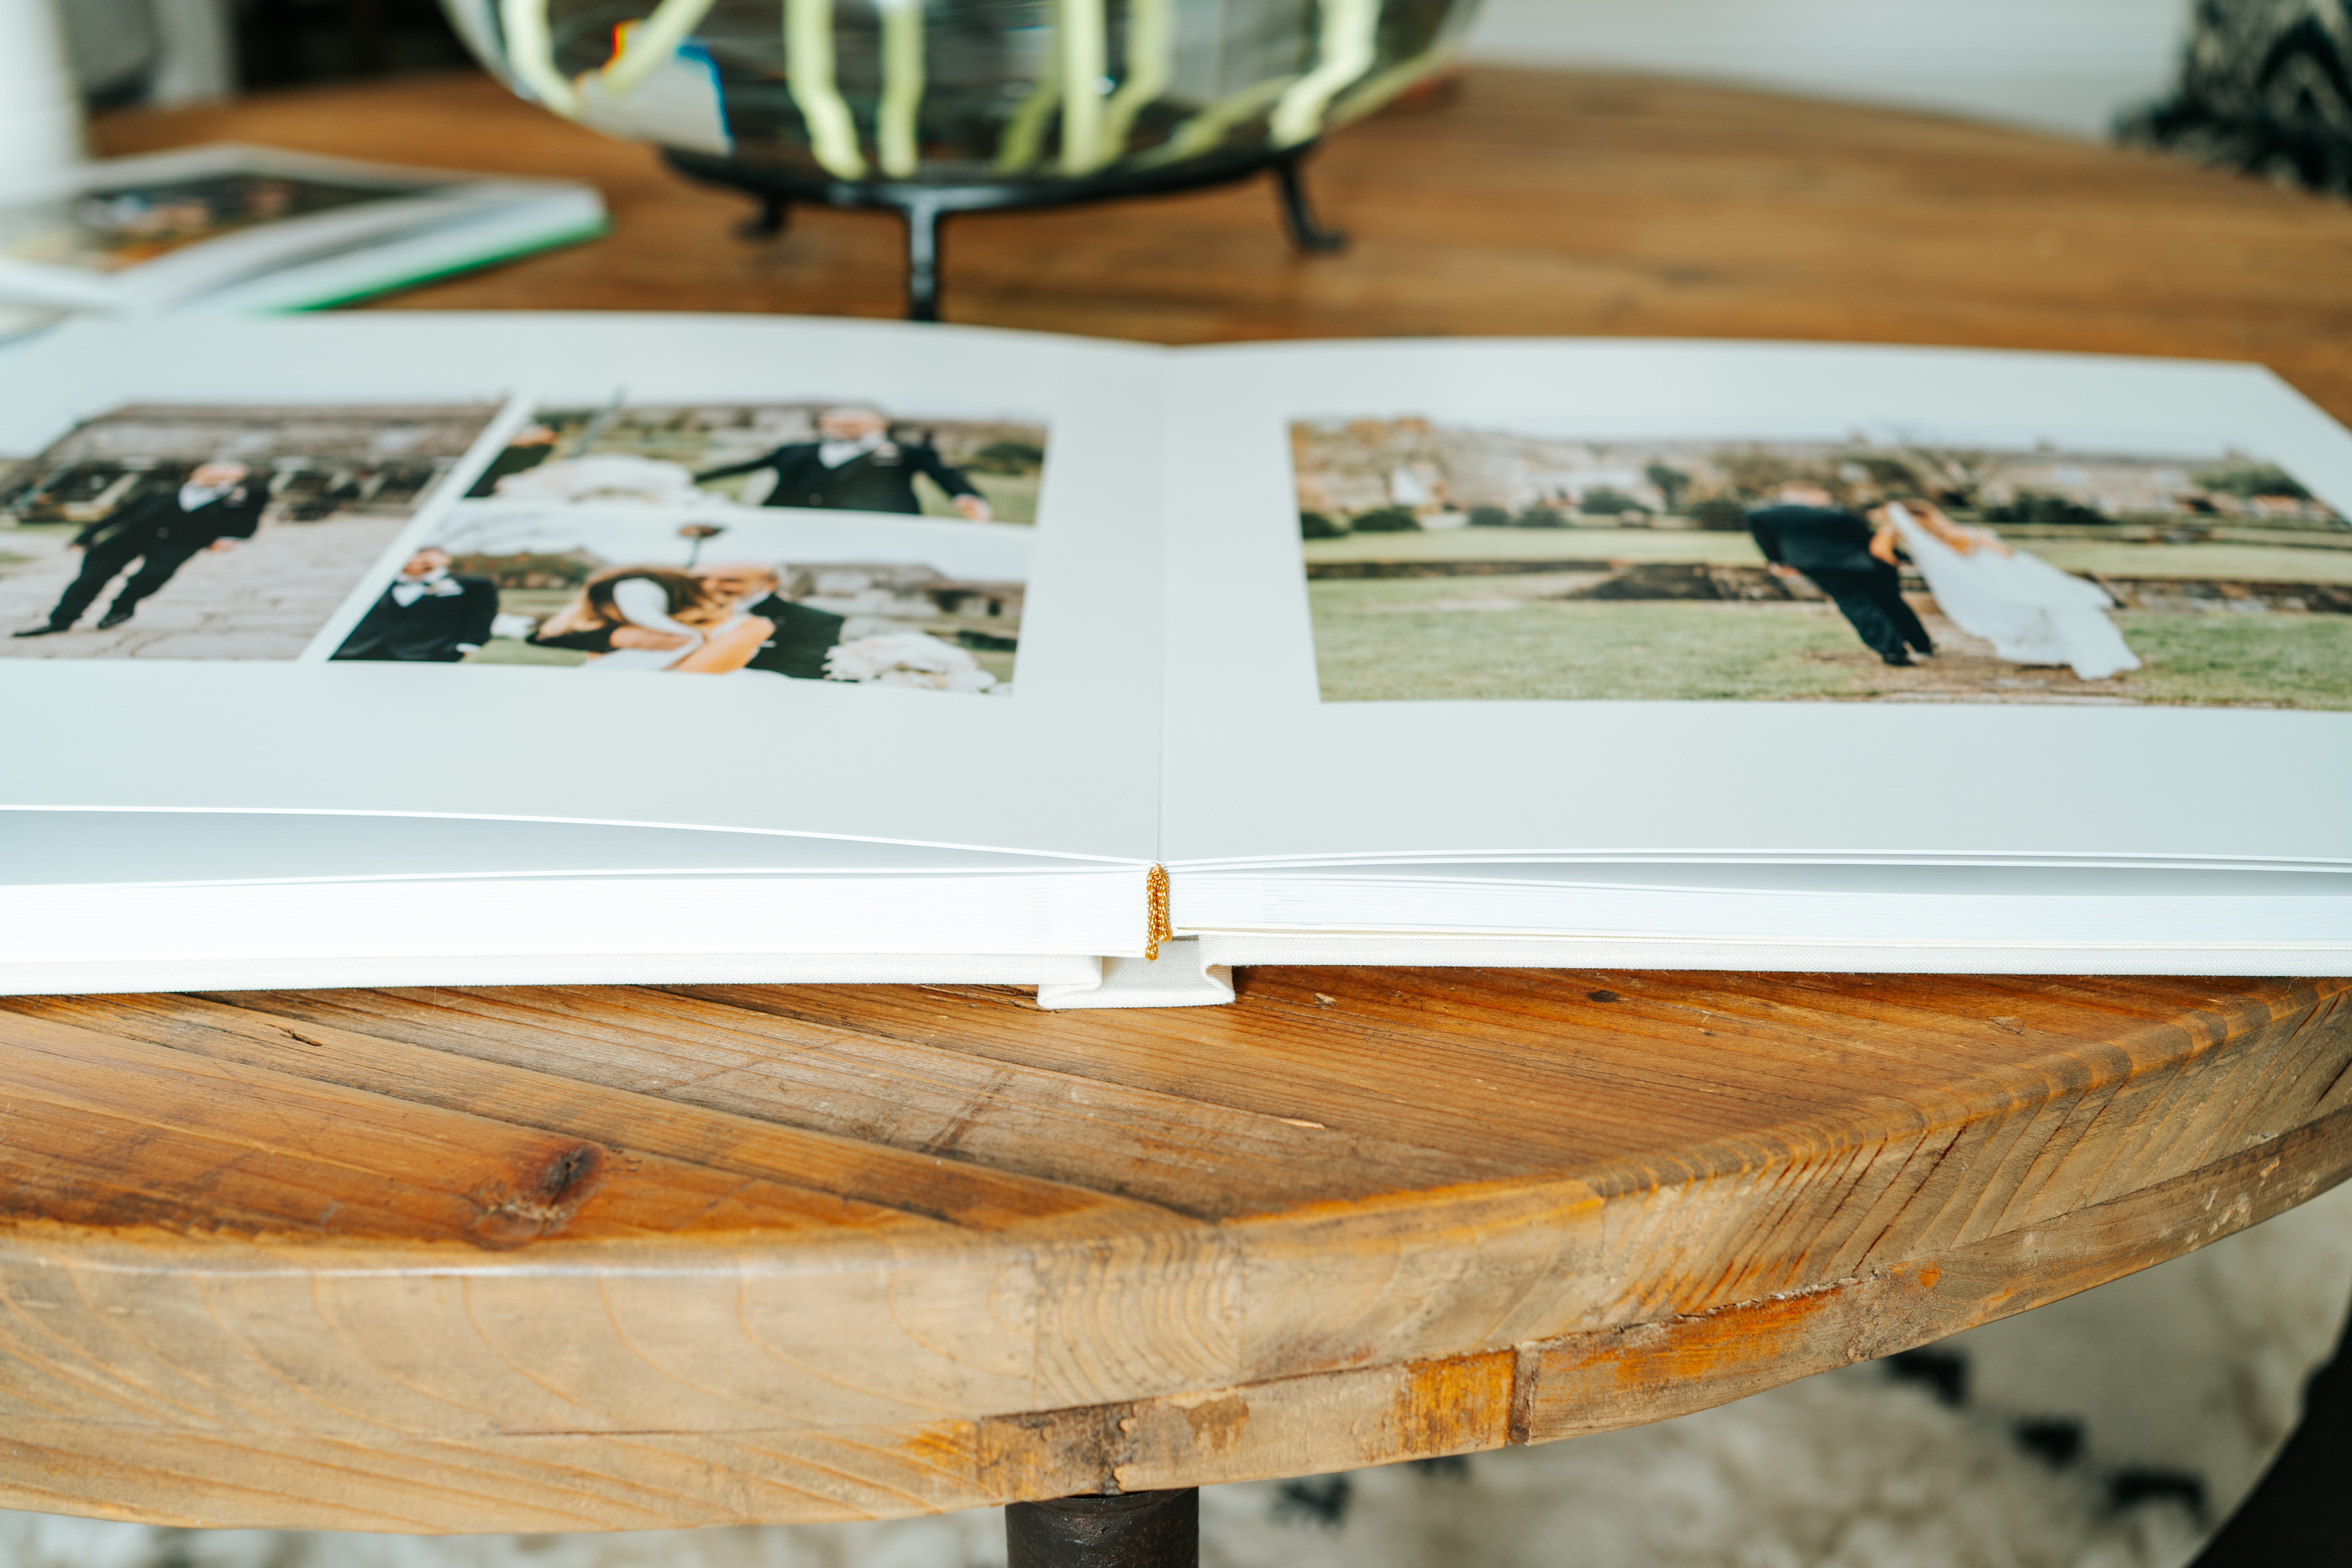 The Best Wedding Albums for Every Budget